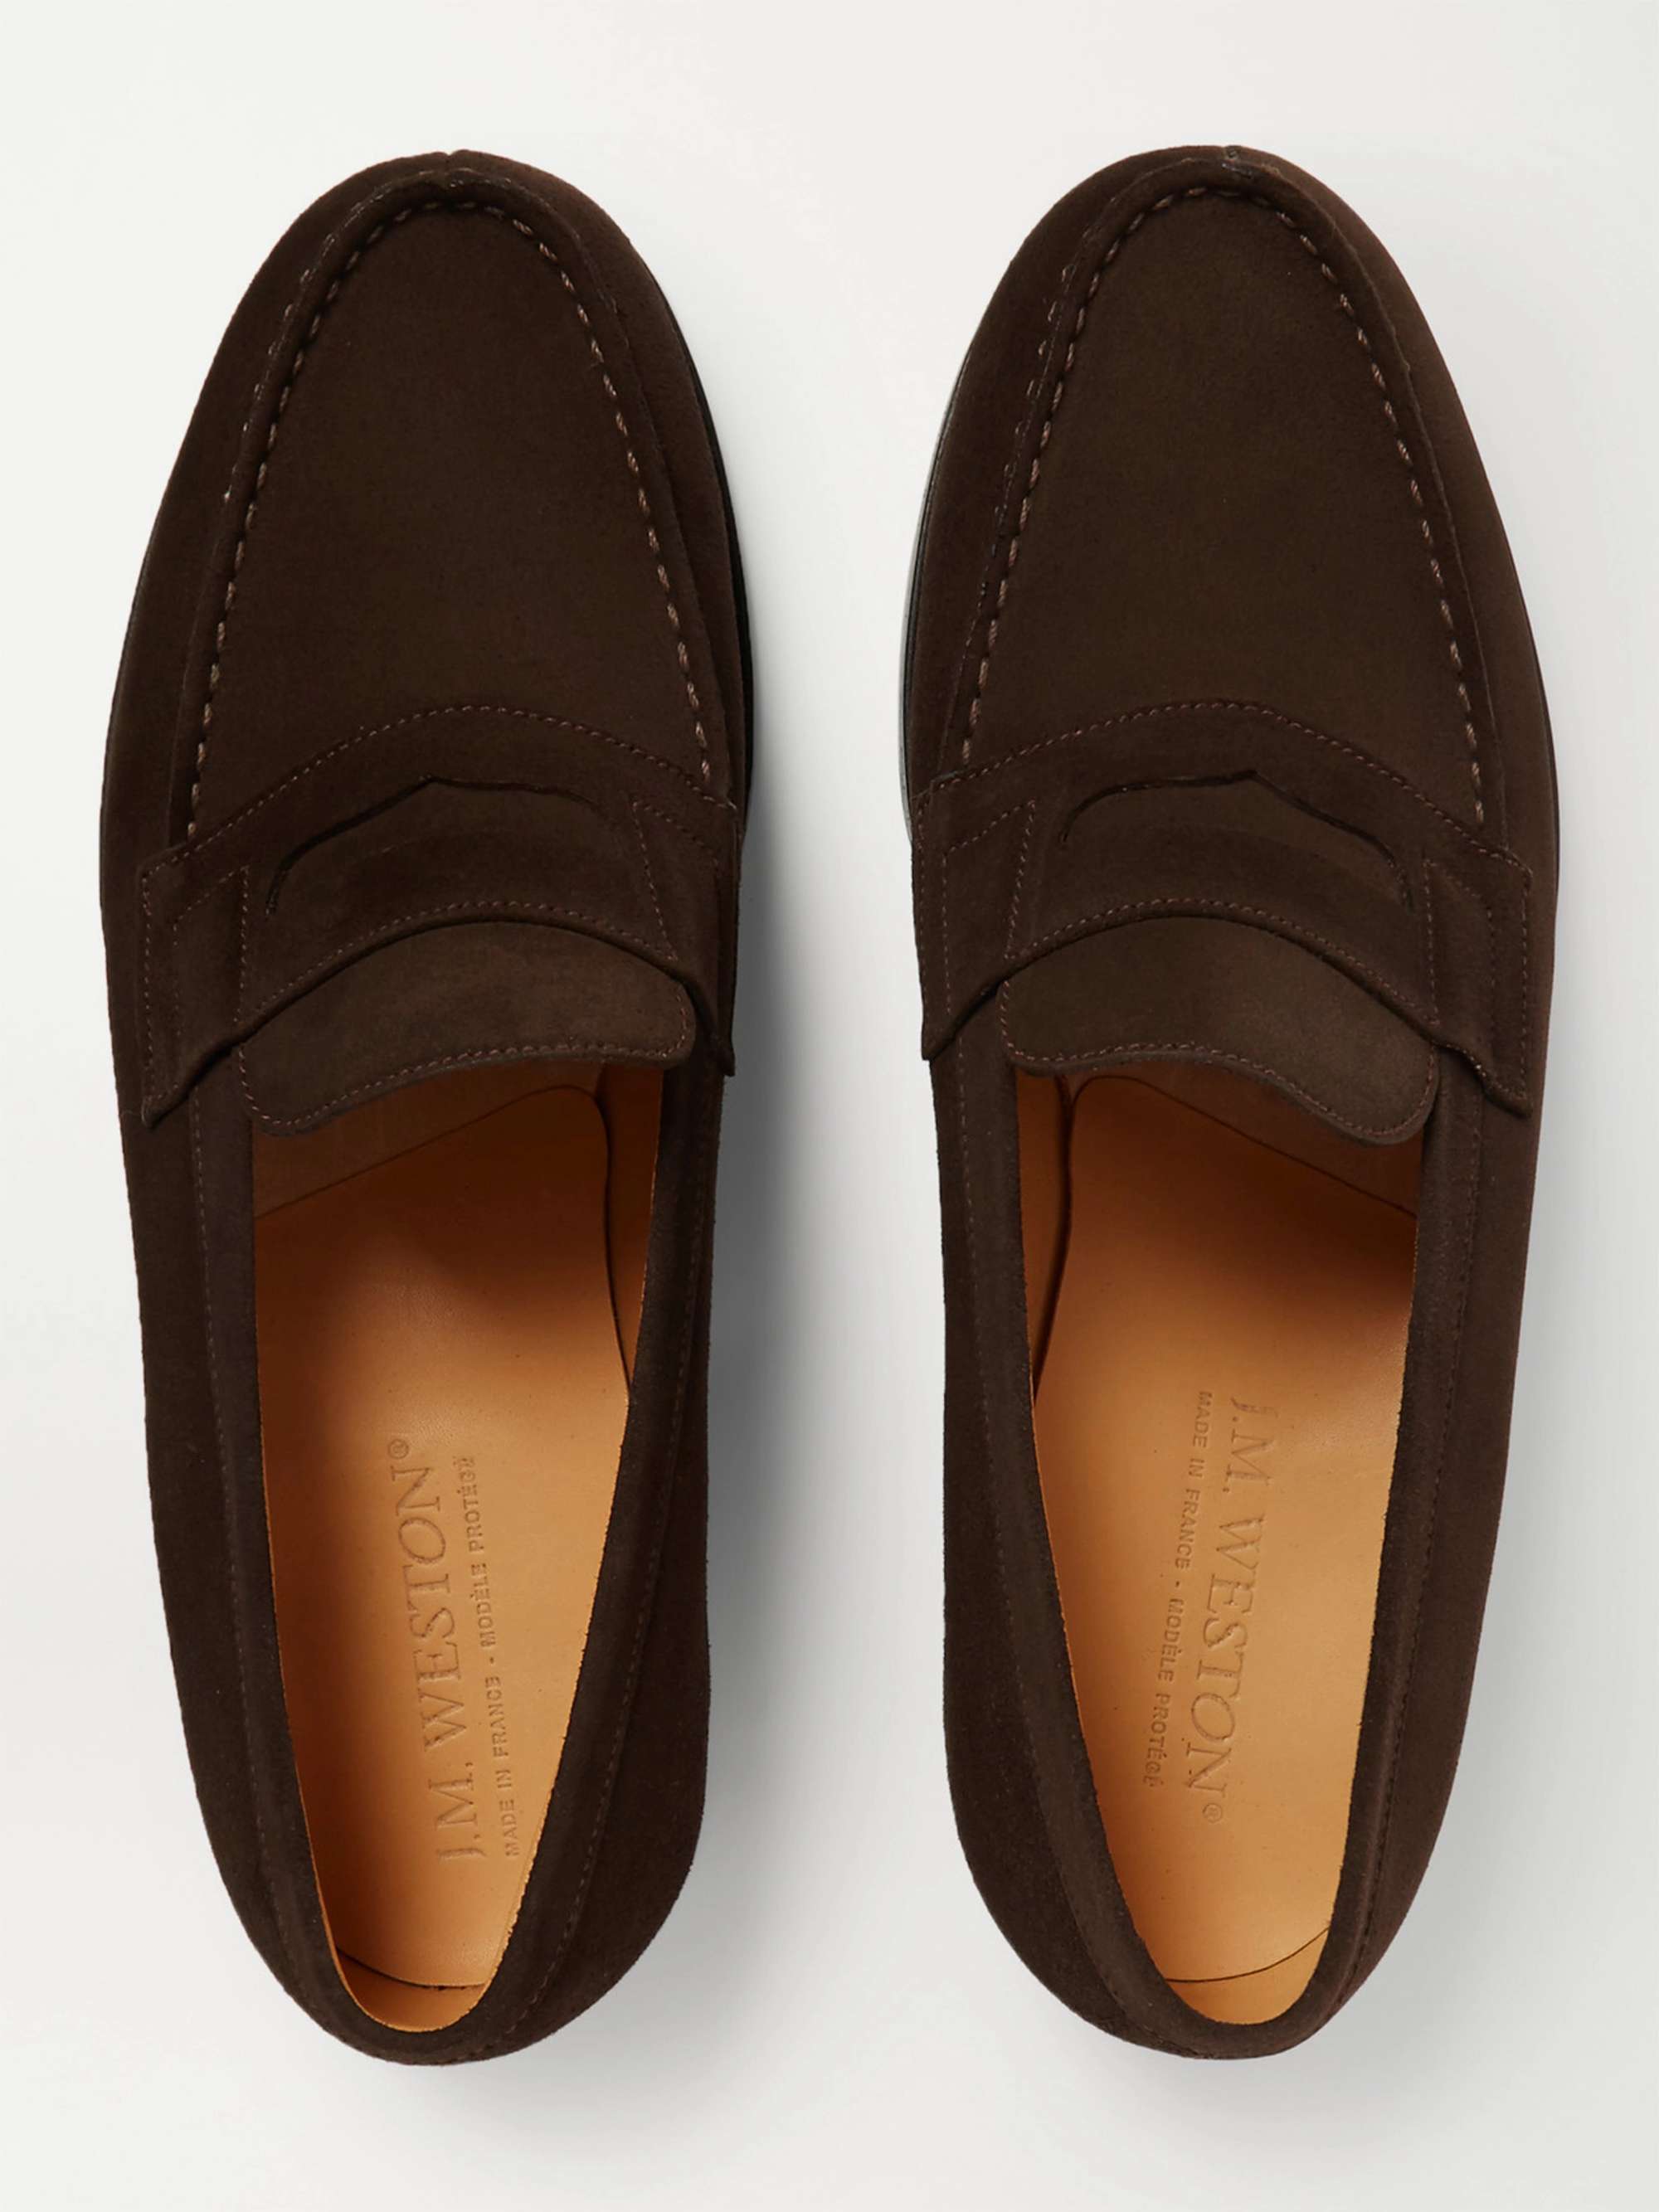 J.M. Weston 180 Moccasin Suede Loafers